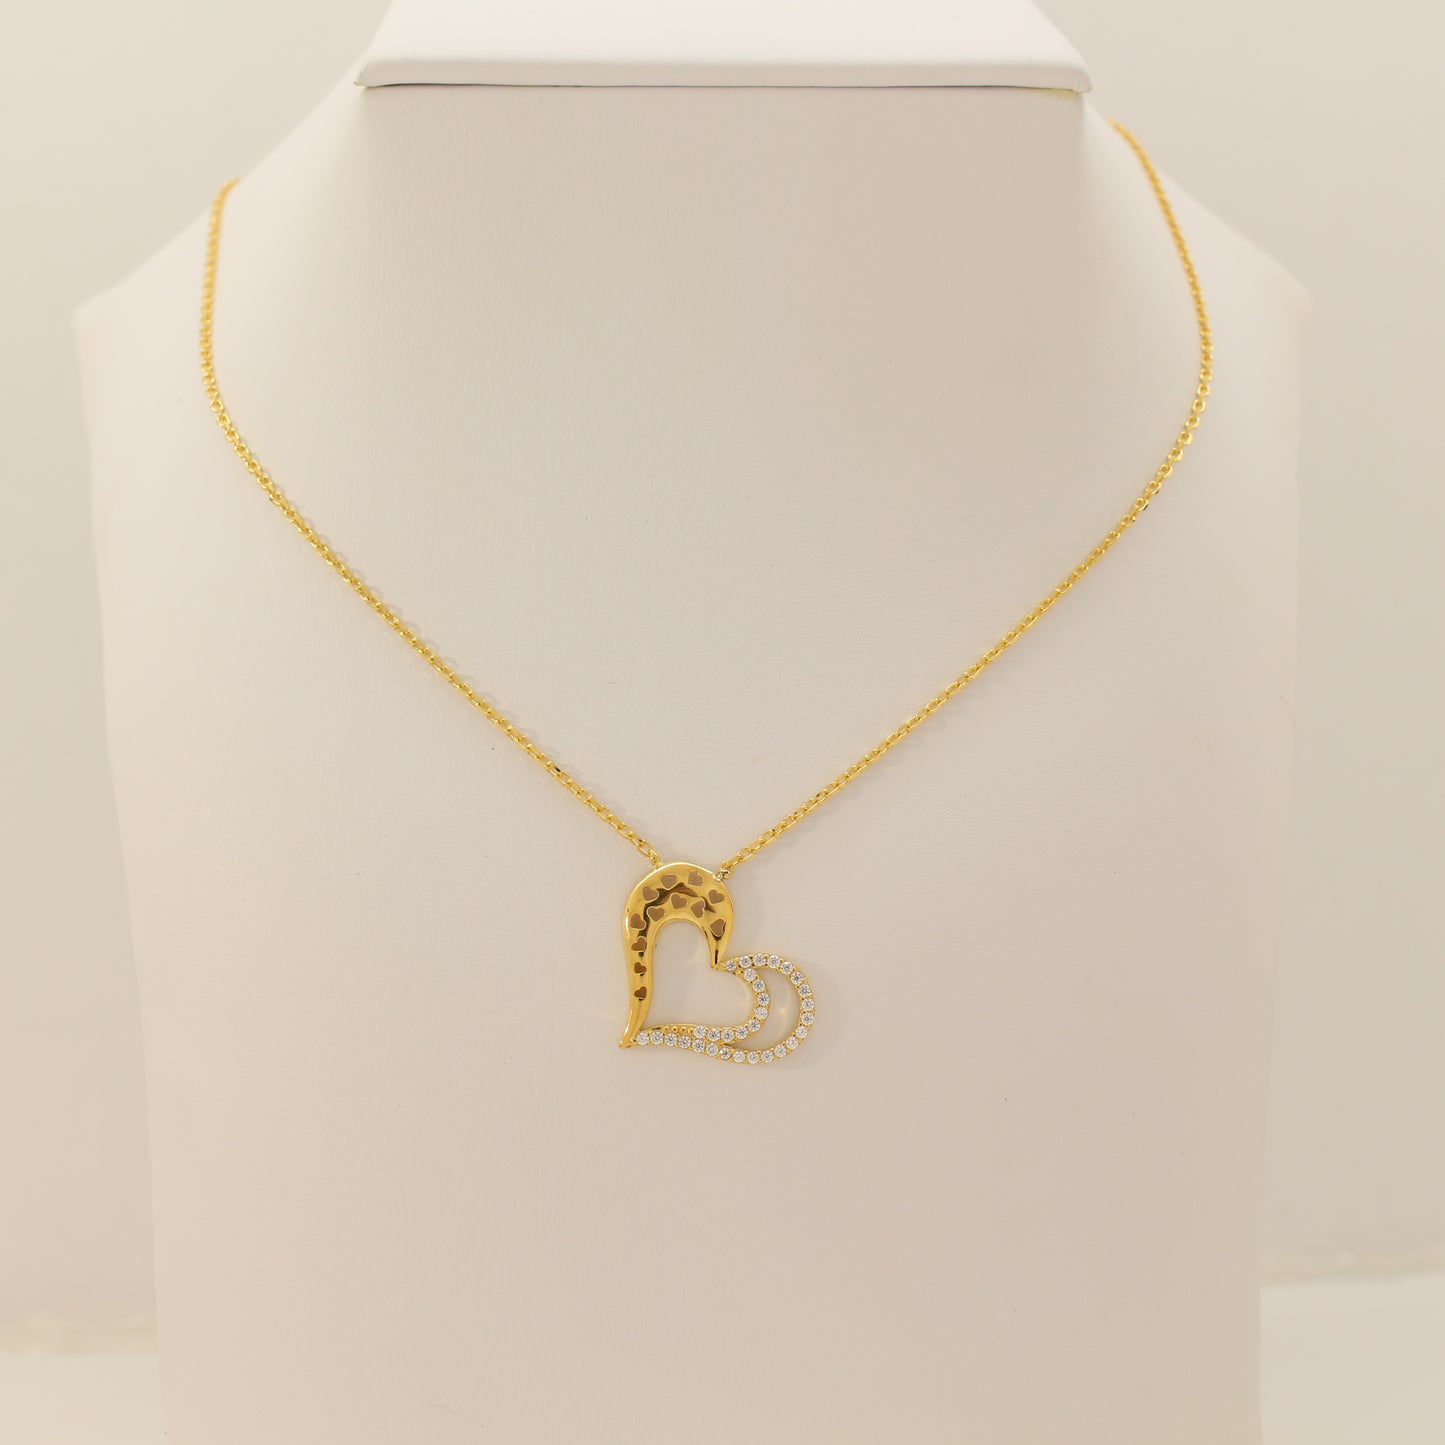 21K Gold Heart Necklace